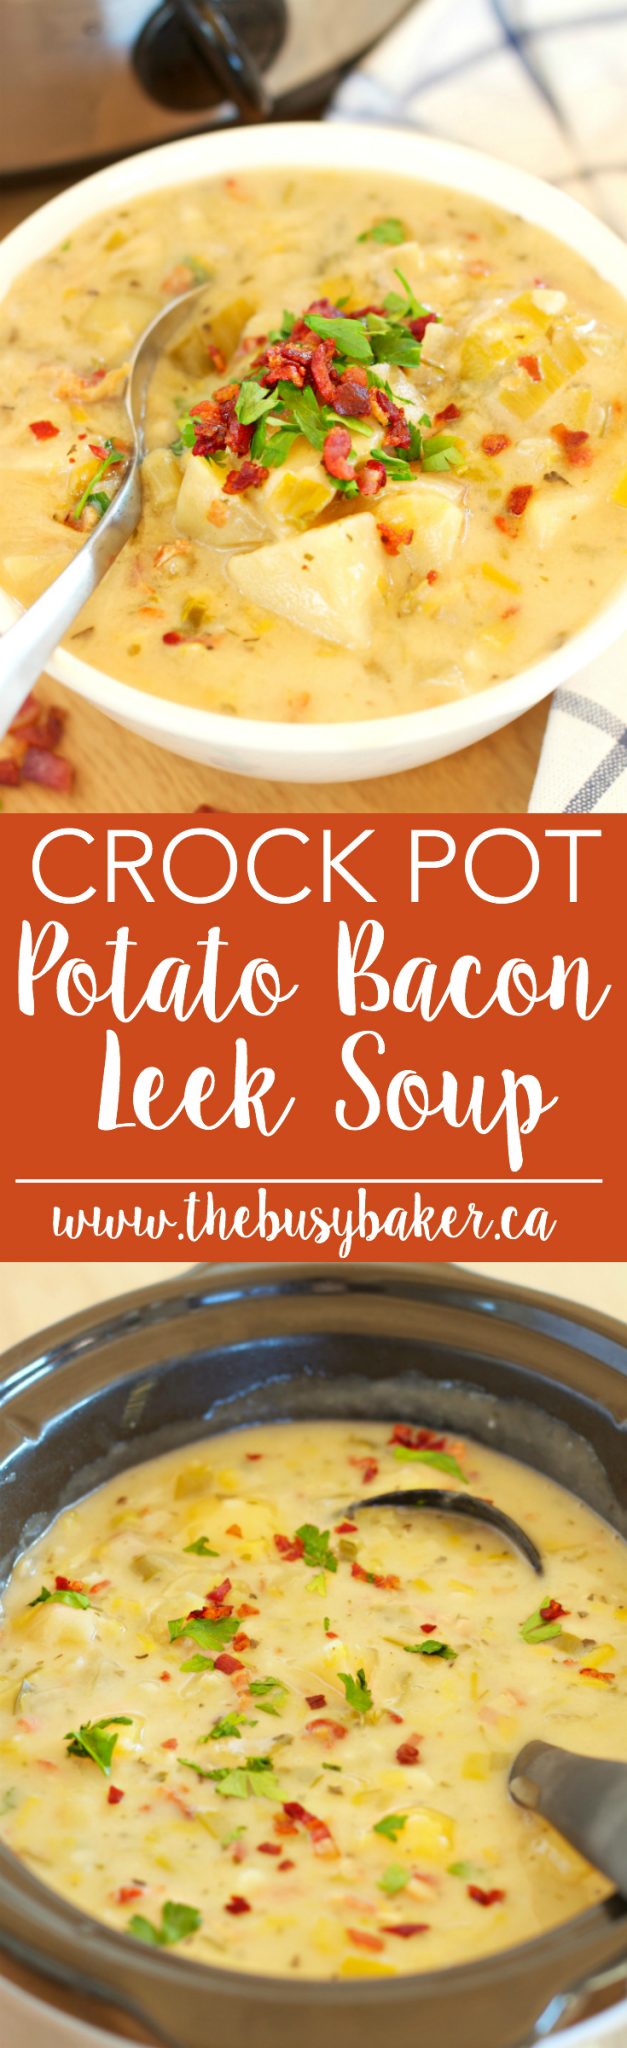 This Crock Pot Potato Bacon Leek Soup is delicious home-style comfort food with a healthy twist! Recipe from thebusybaker.ca via @busybakerblog